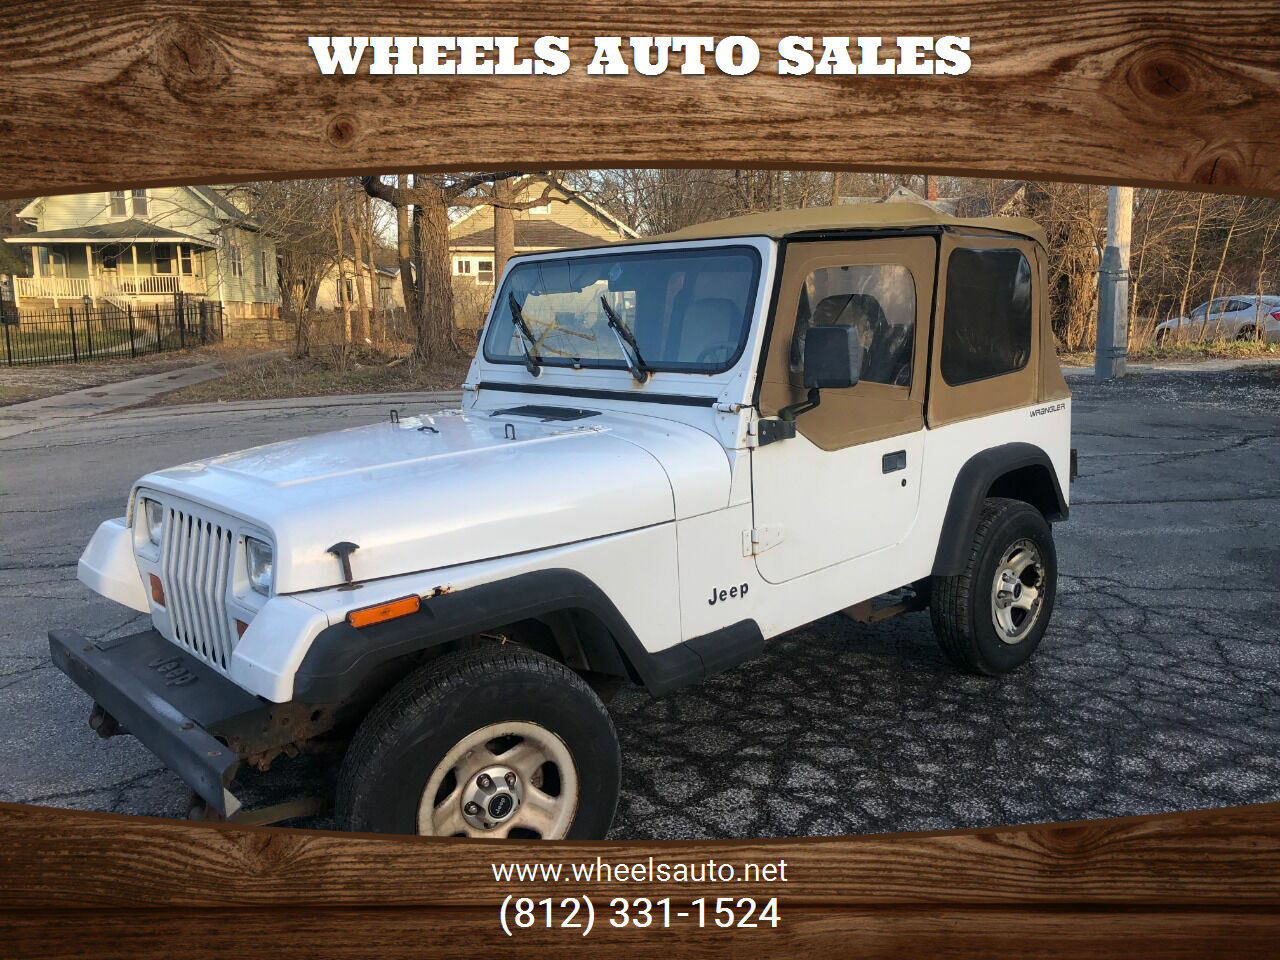 1995 Jeep Wrangler For Sale In Greenville, MS ®